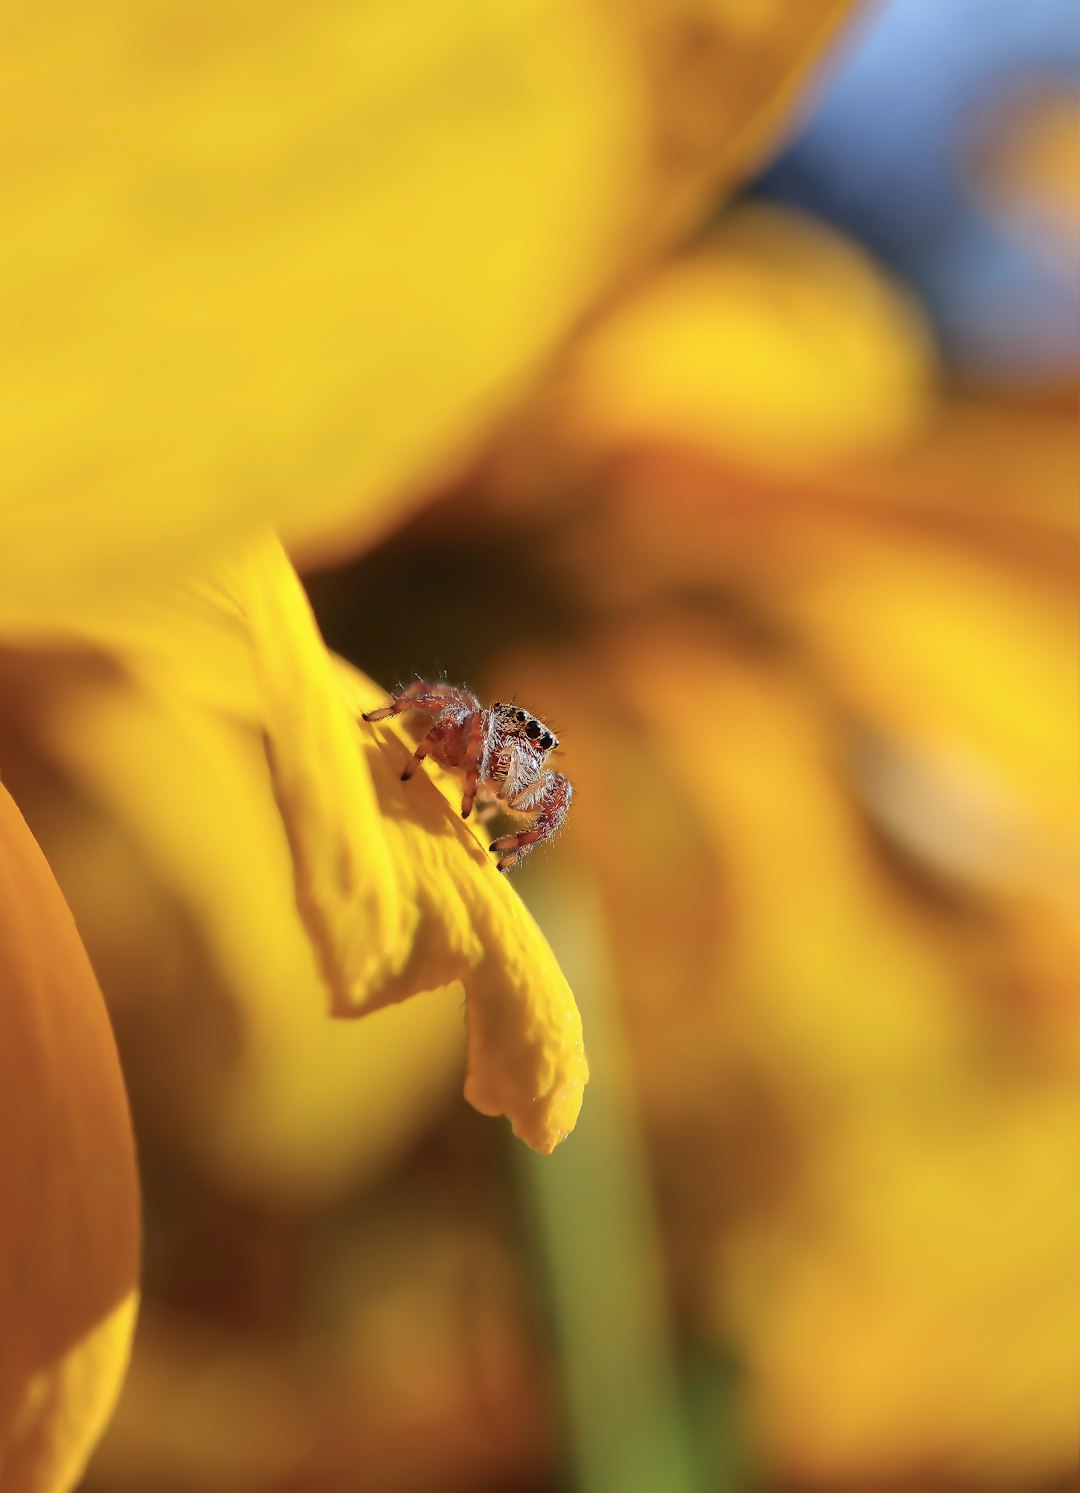 brown spider on yellow petal